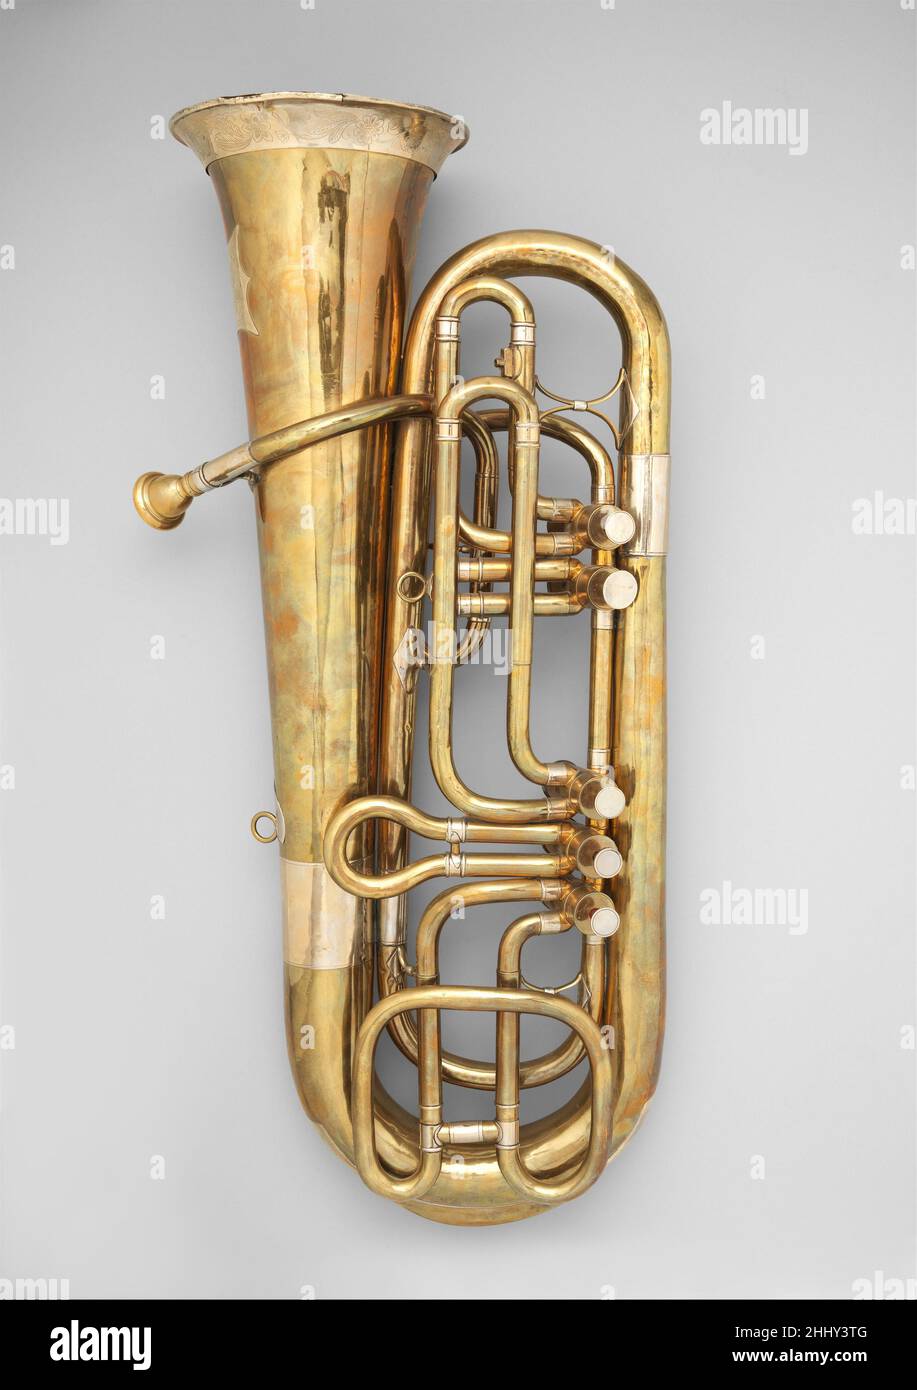 Tuba ca. 1855 attr. C.W. Moritz The overall design of the instrument and configuration of its valves is similar to the early tubas made by Johann Gottfried Moritz in Berlin. It has five Berlin valves (bottom-sprung with a single guide slot) and each valve loop has a tuning slide. The bell garland is engraved with a flower, oak leaf and acorn motif. The white metal plaque affixed to the bell bears no maker’s description but is decorated in the same style as the bell garland. The motif and the style of execution is typical of instruments made in Markneukirchen during the mid-nineteenth century.. Stock Photo